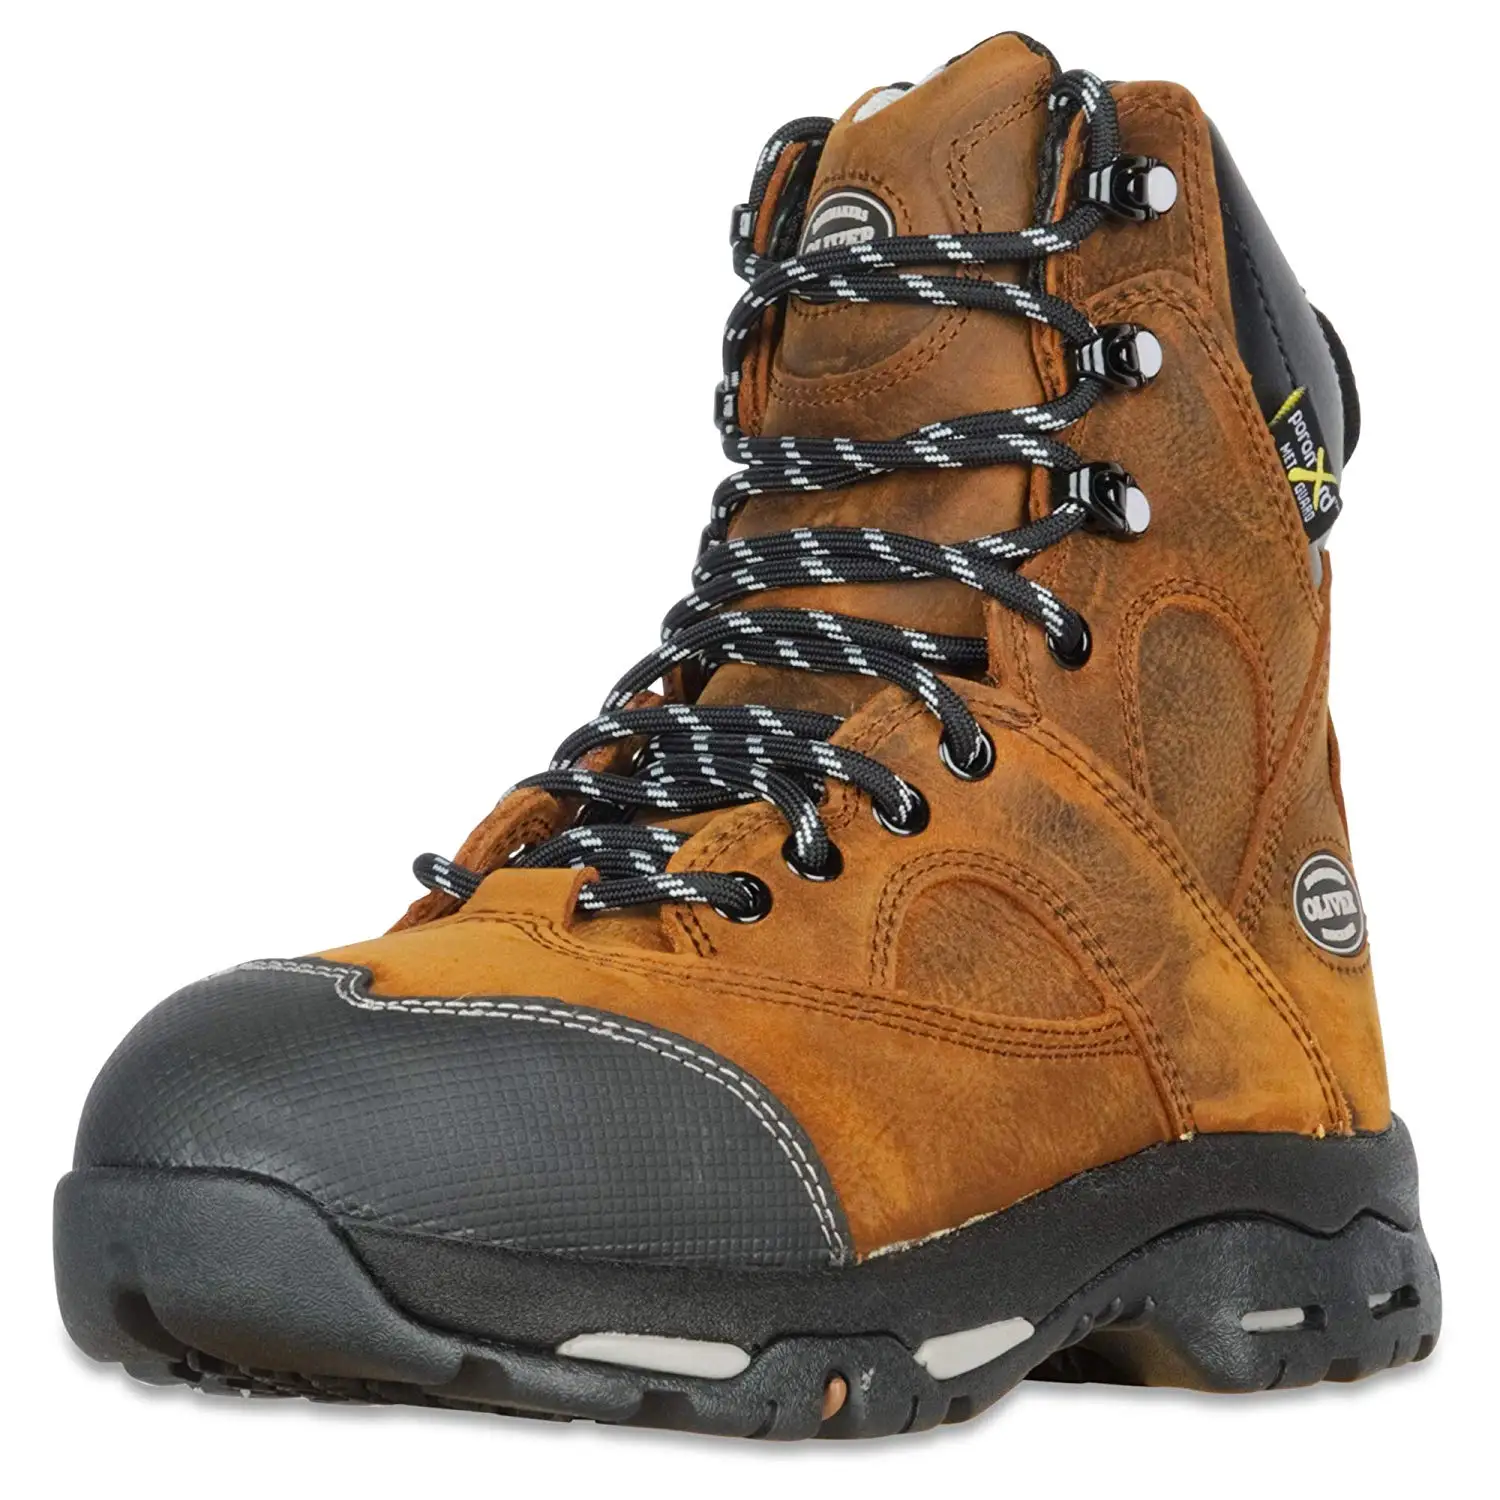 deals on work boots